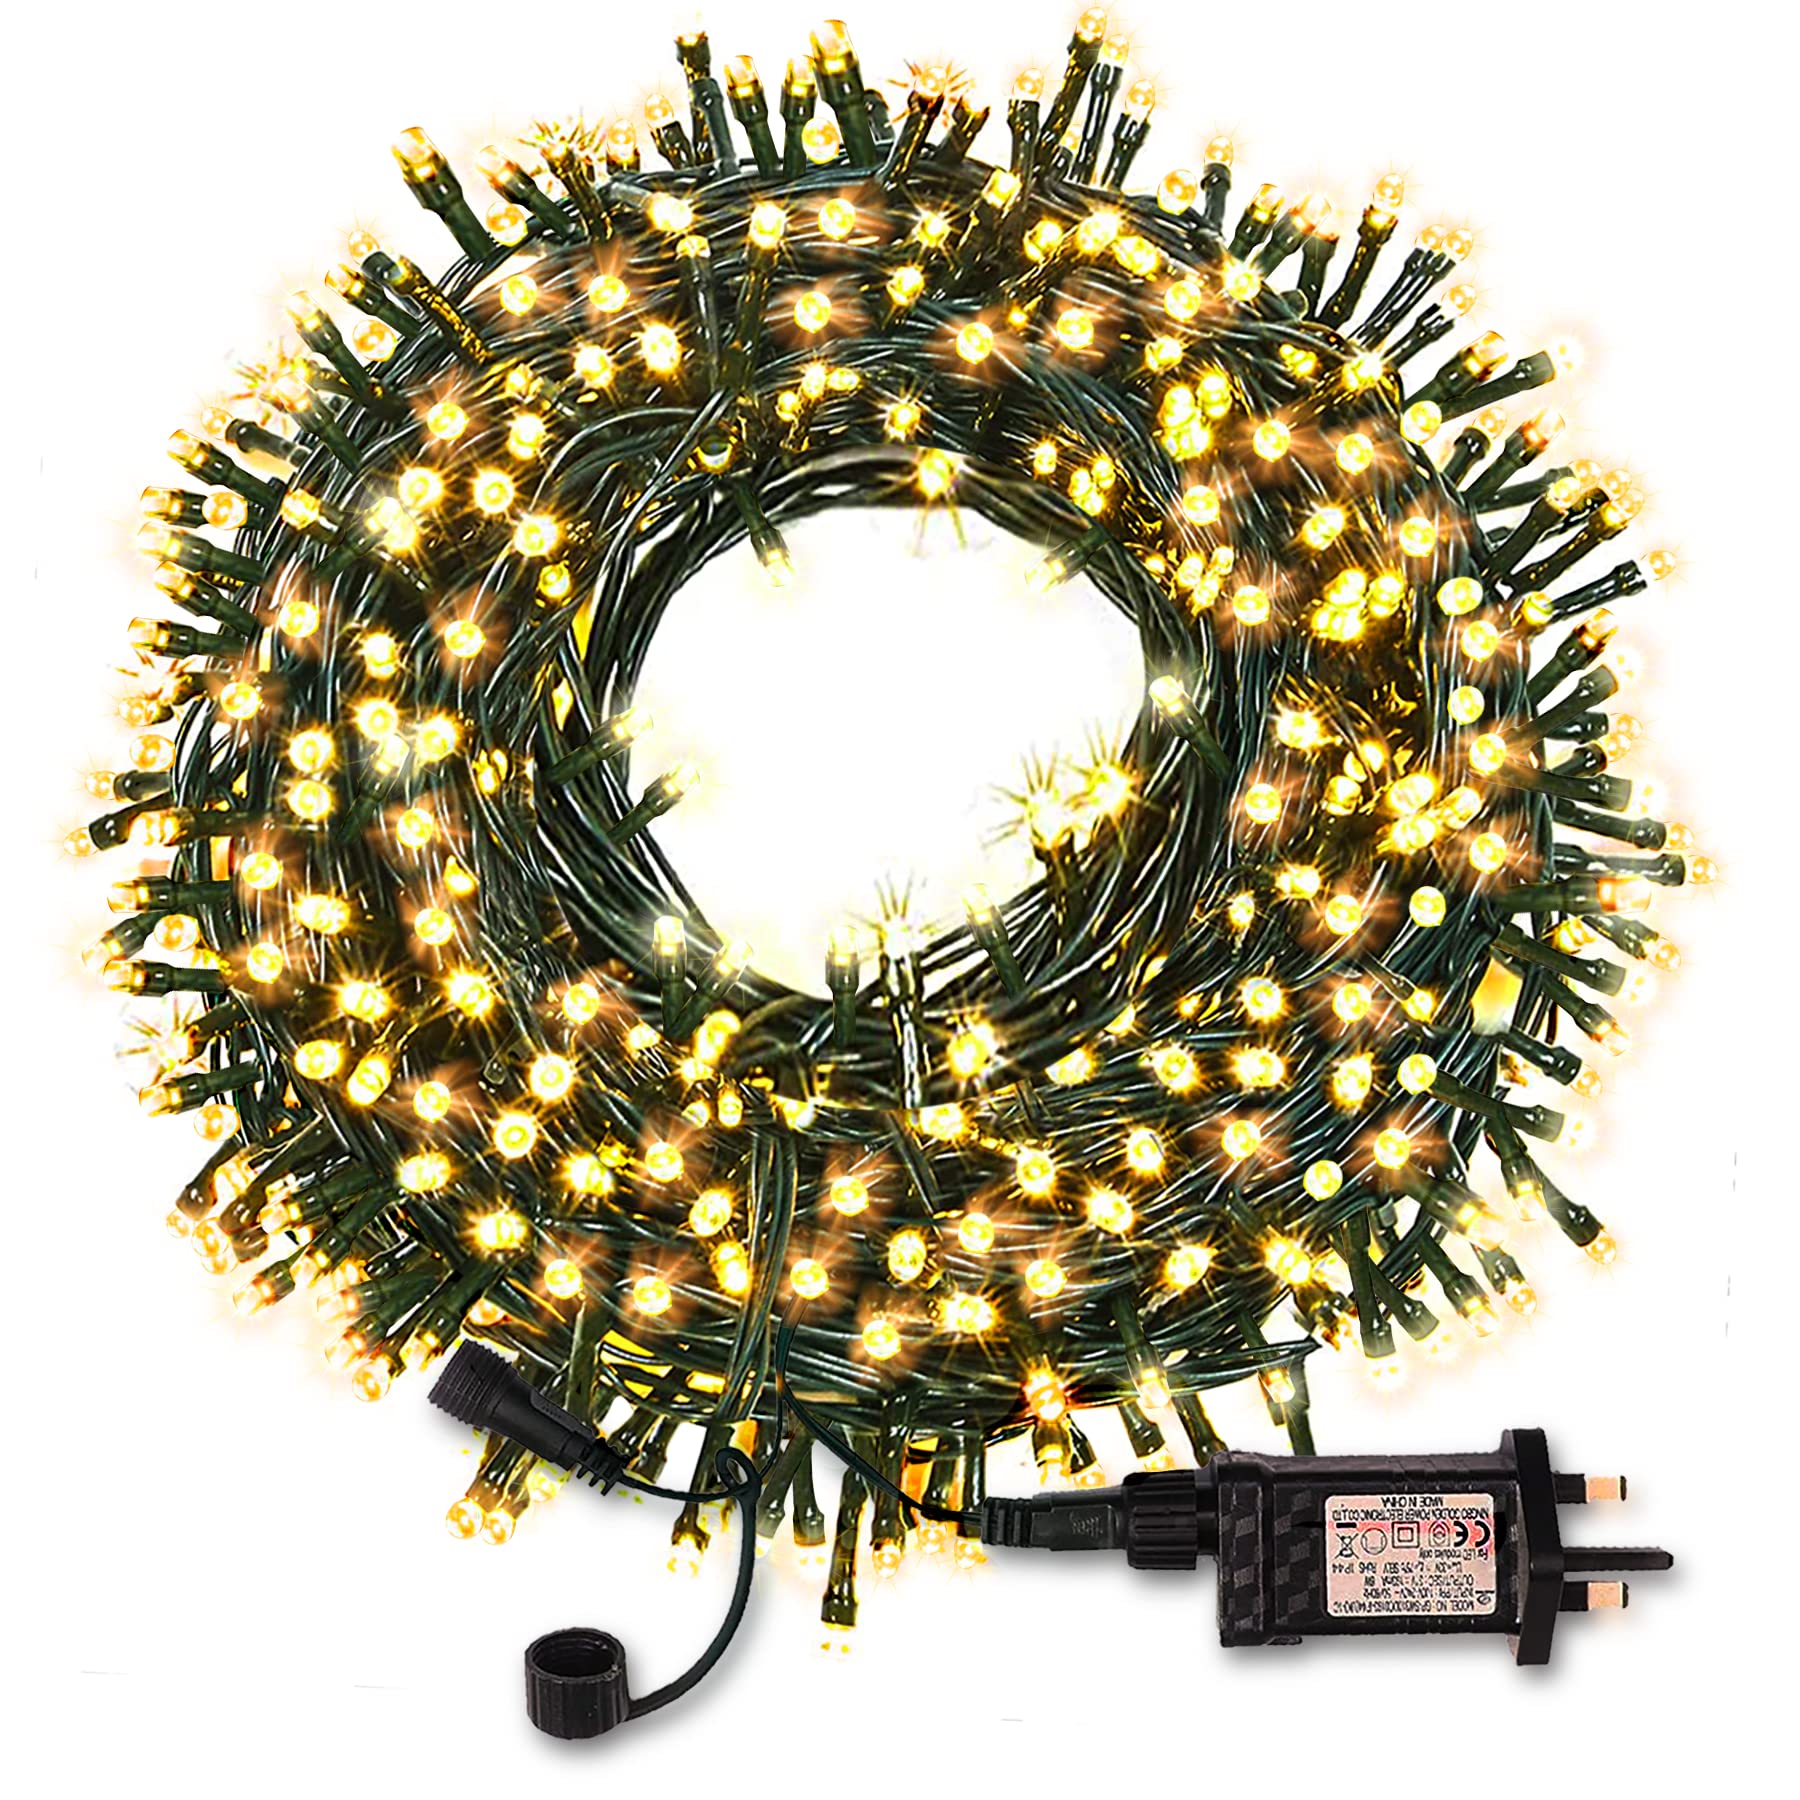 Fairy String Lights, Outdoor Garden Light Mains Powered, Christmas Tree String Light, 30m 300 LED 8 Modes Waterproof Decorative Xmas Light for Bedroom, Parasol, Gazebo, Wedding, Party (Warm White)